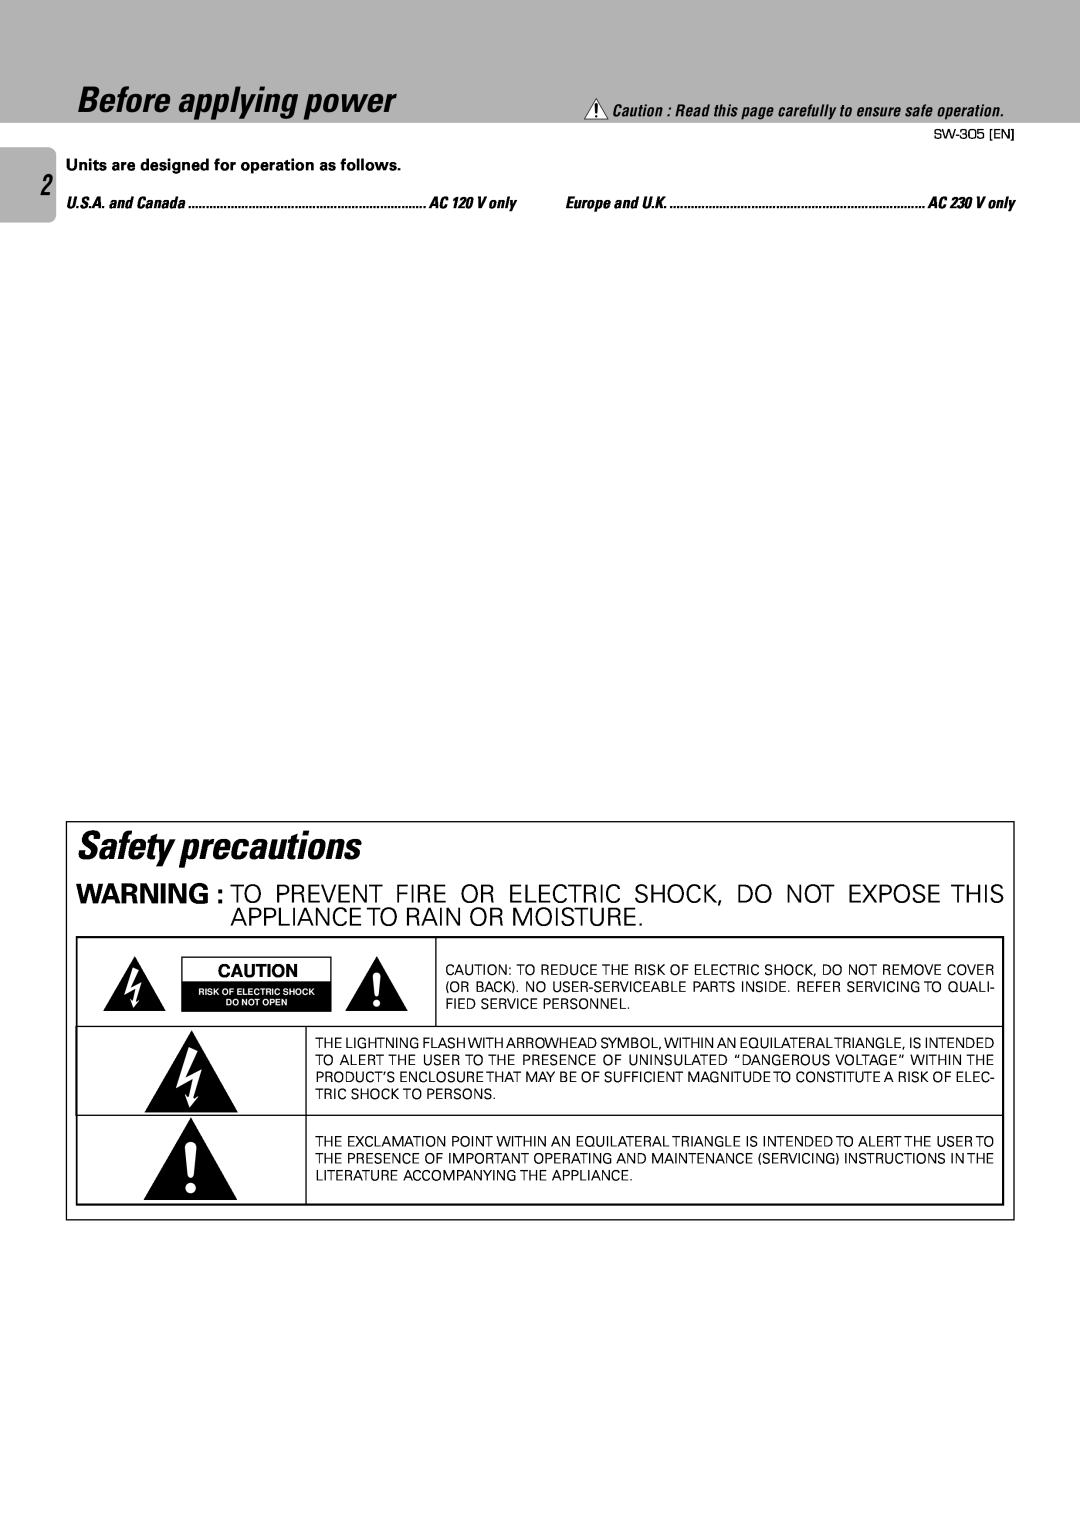 Kenwood SW-305 Safety precautions, Before applying power, Caution Read this page carefully to ensure safe operation 